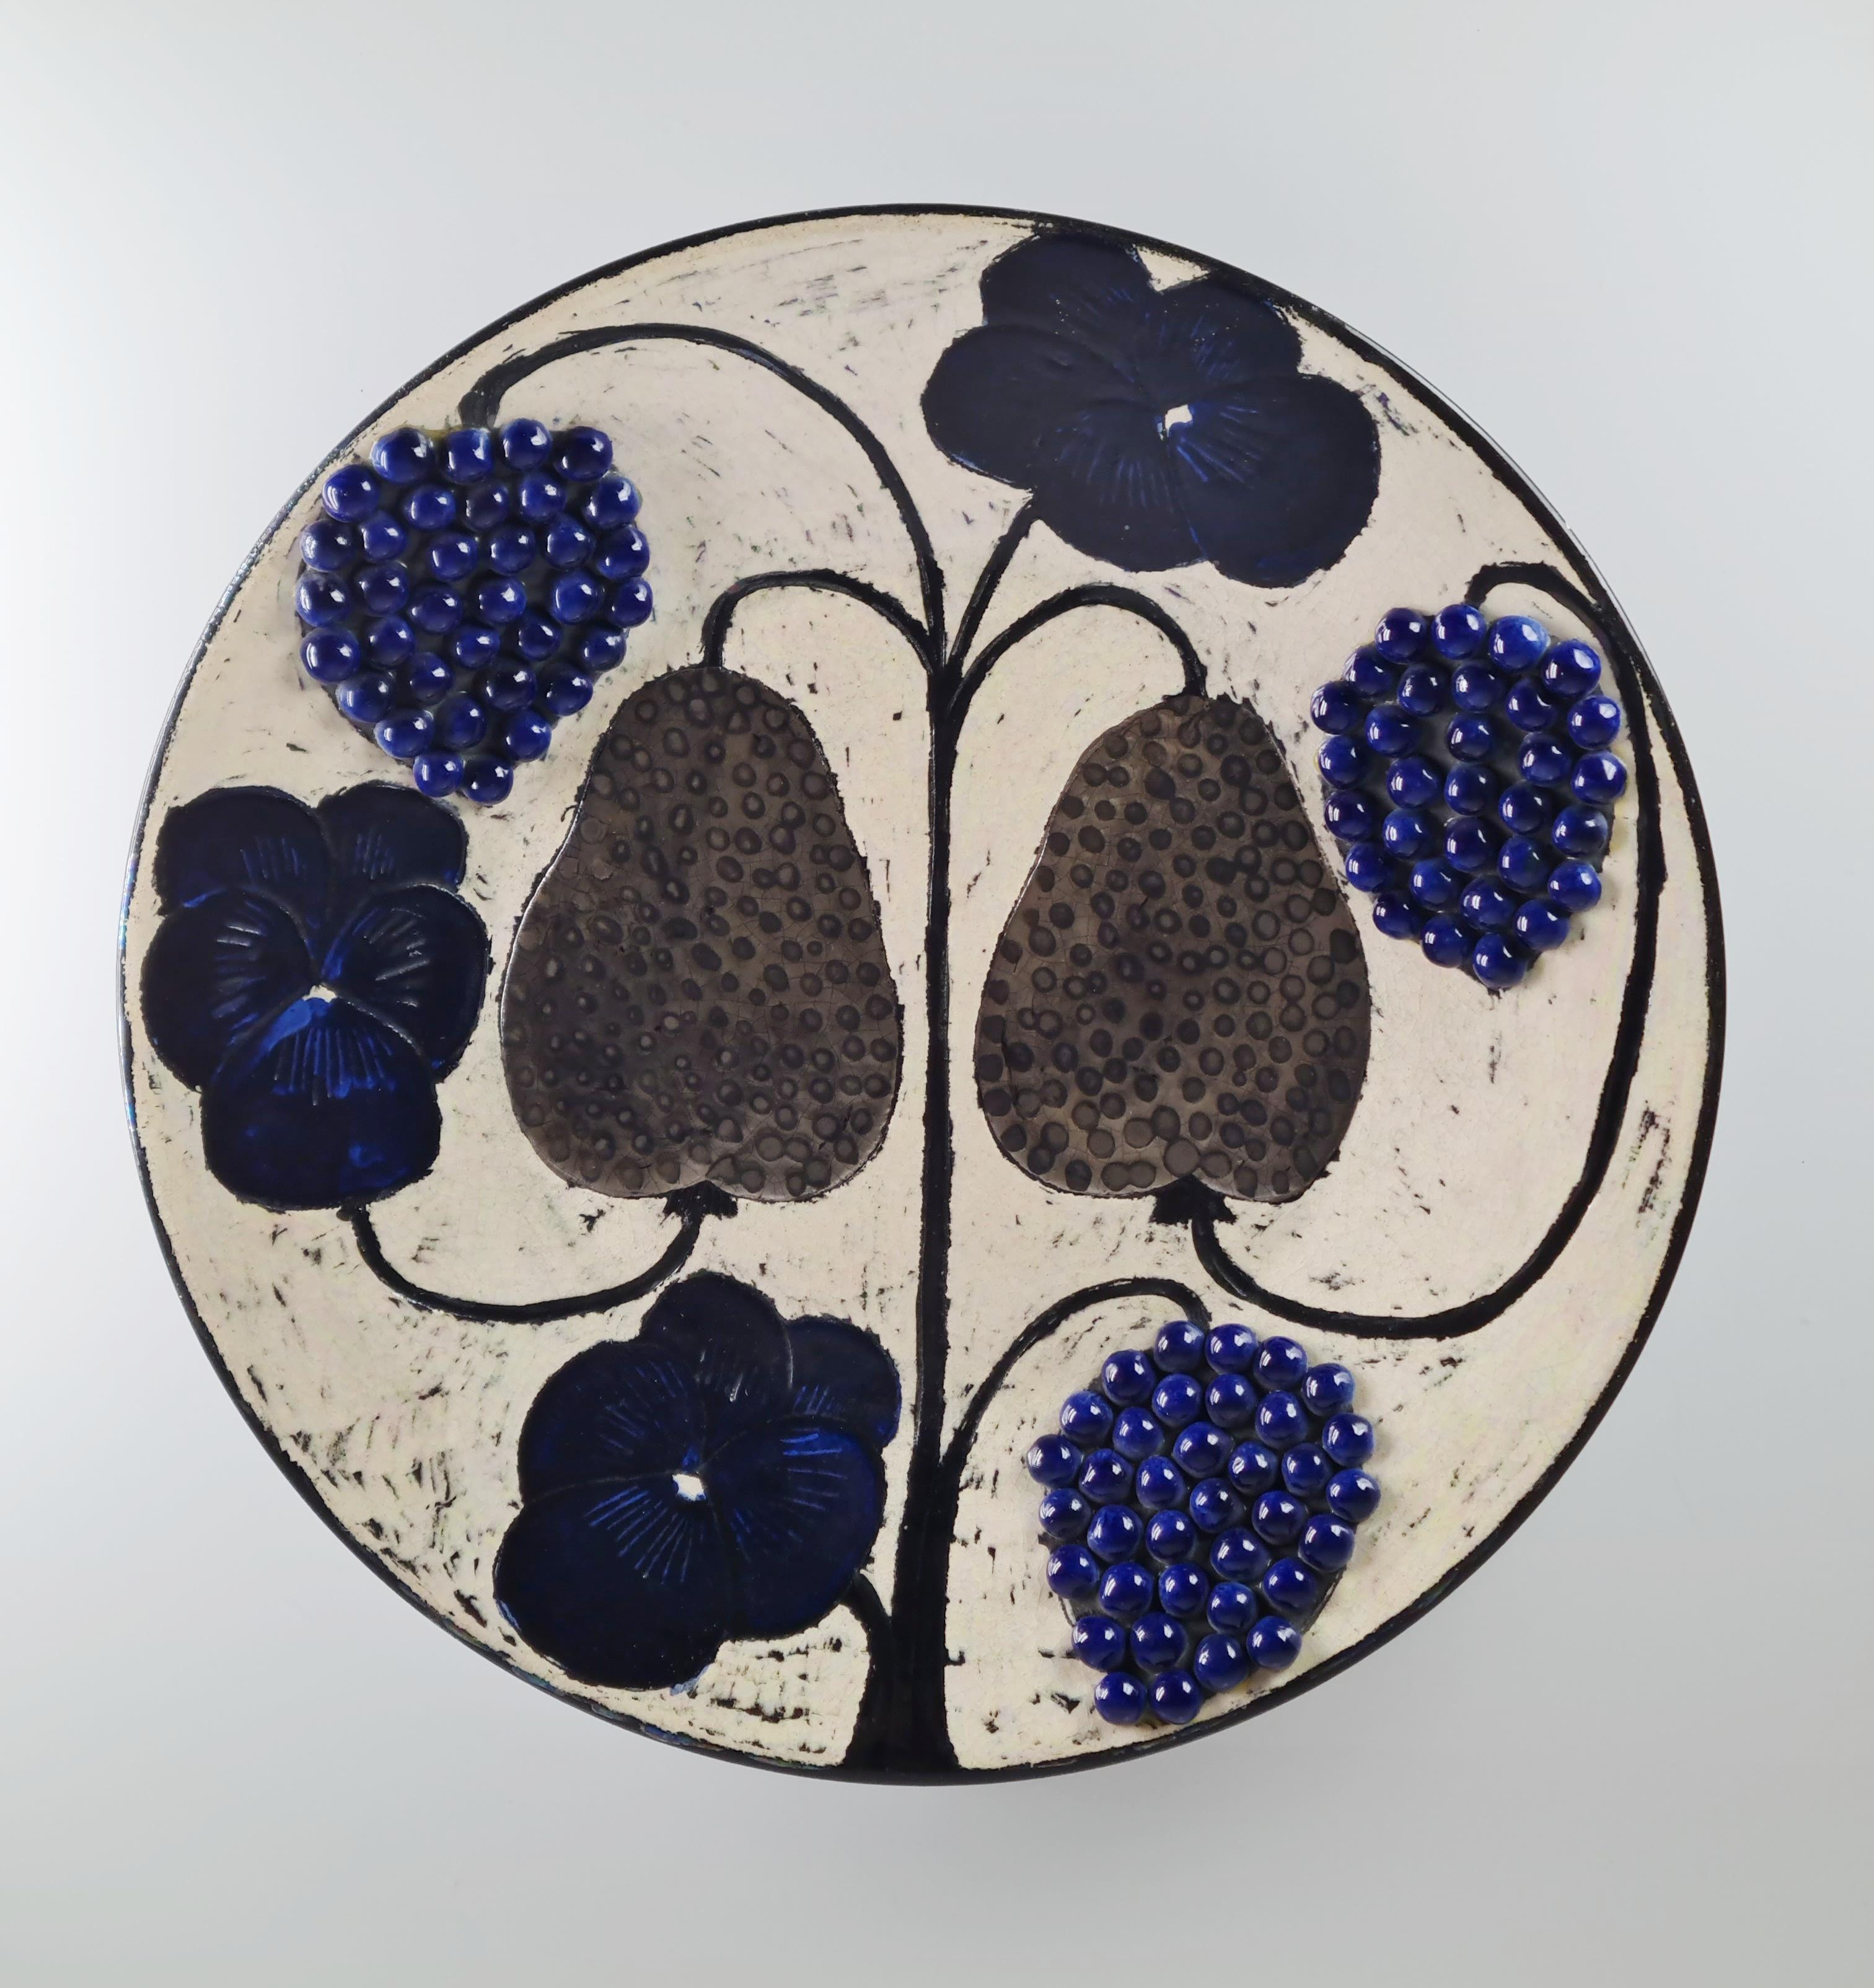 A lovely and unique decorative plate designed by the artistic genius Birger Kaipiainen, manufactured by Arabia of Finland in the late 20th century. Kaipiainen has always been the one to stand out in the design world, through the sheer creativity and